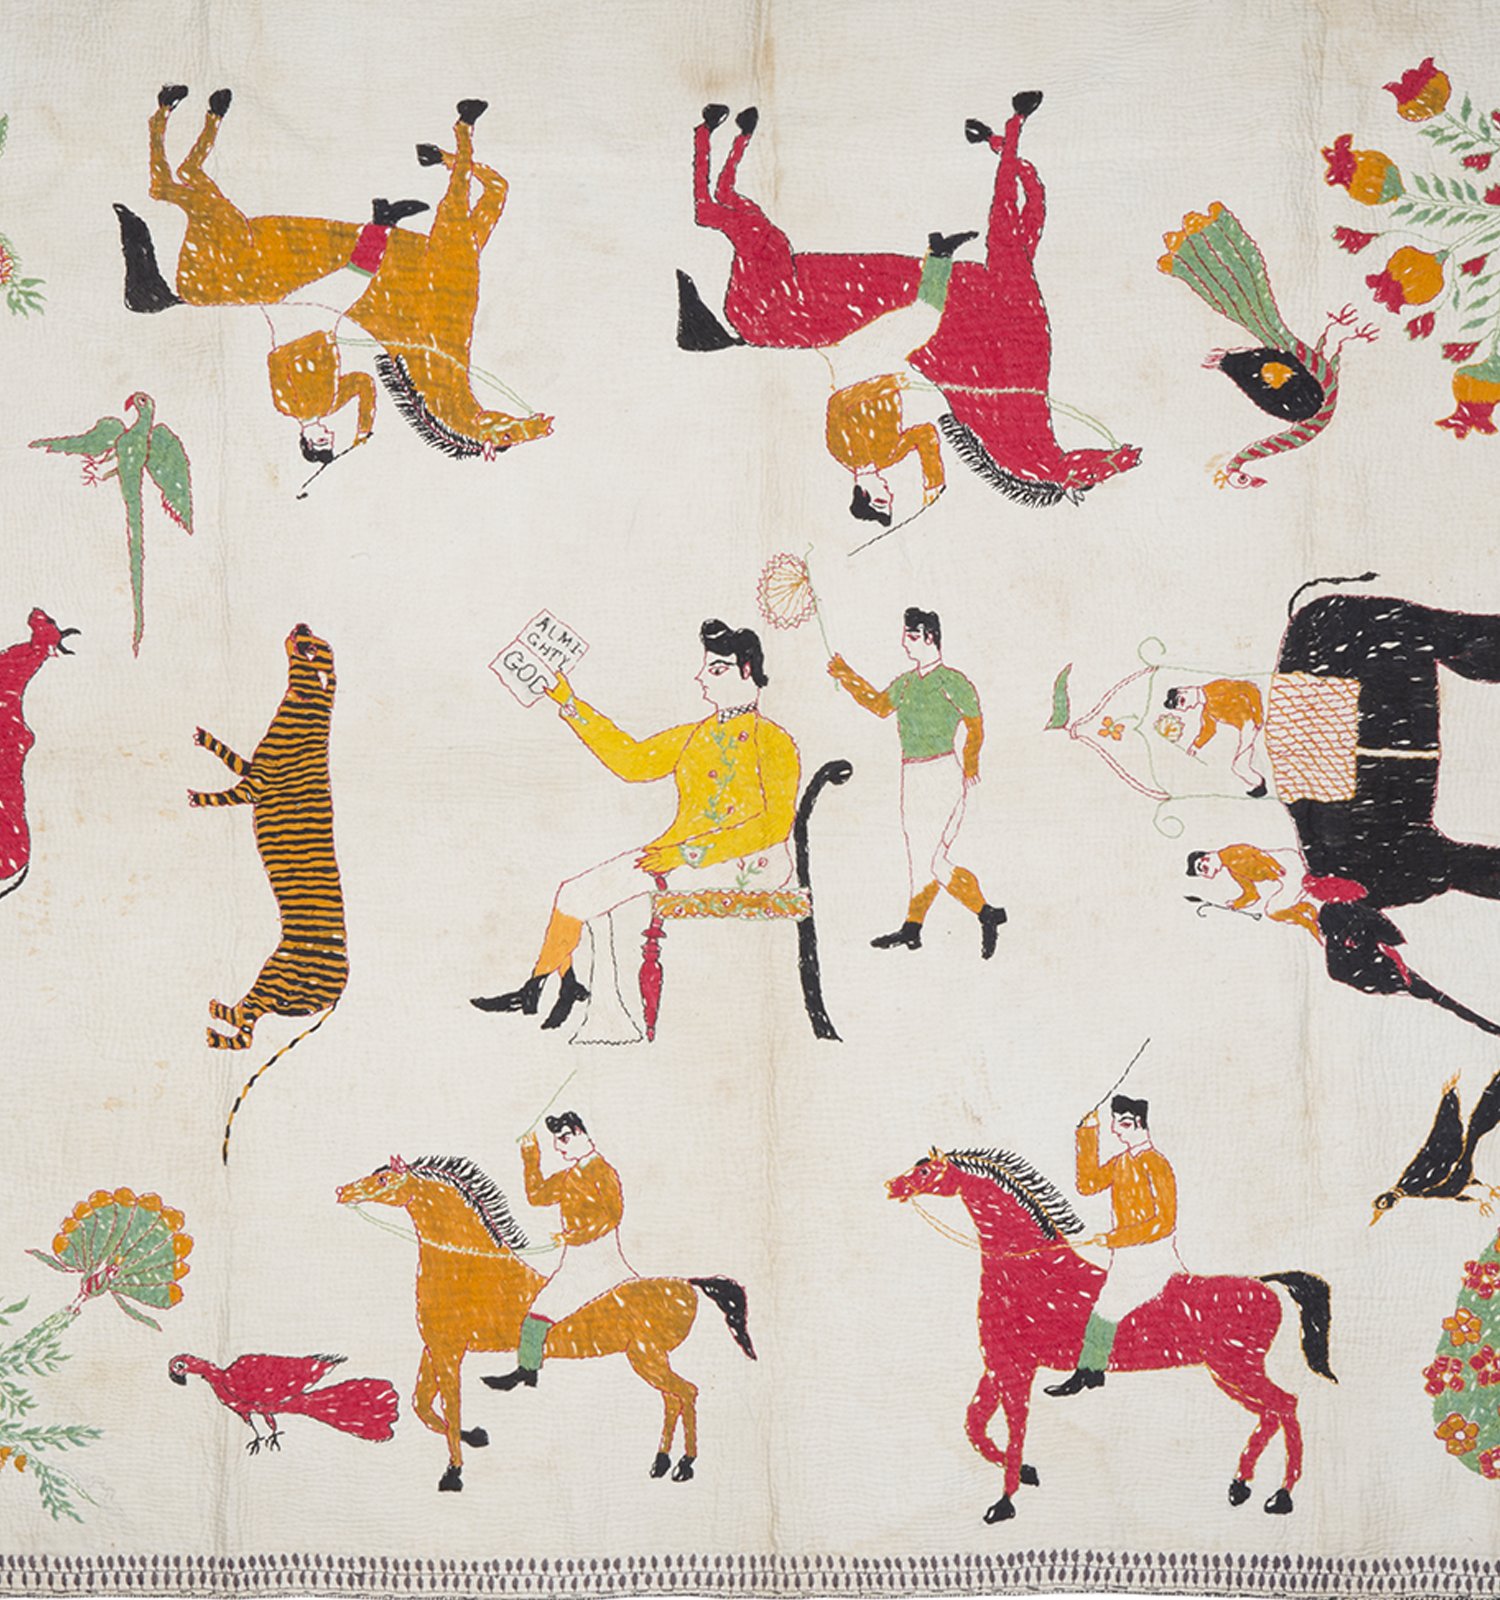 Kantha depicting various animals, trees and flowers. Humans are shown riding the horses, scattered across the textile.